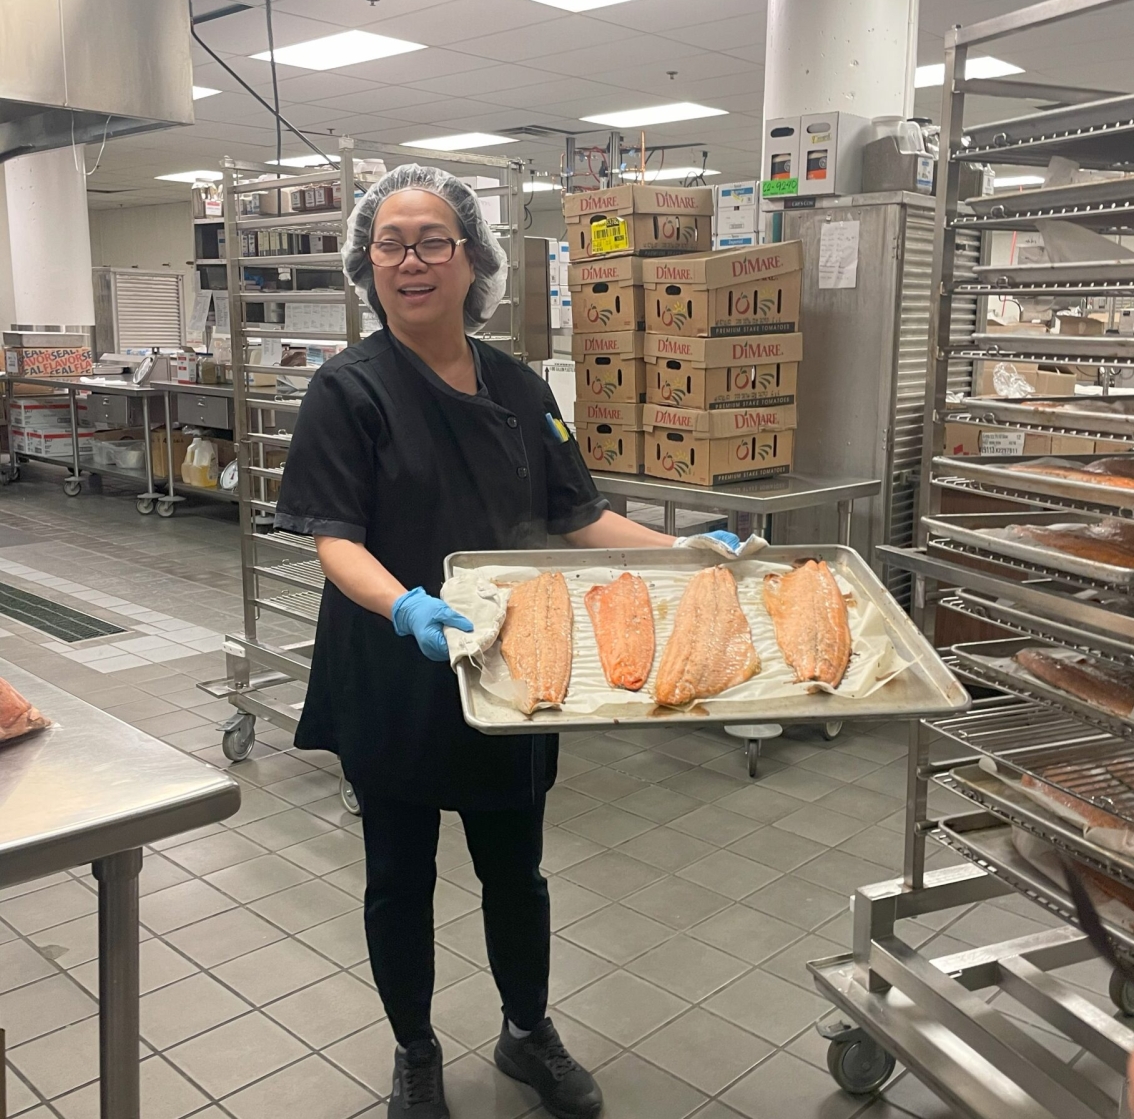 Seattle Schools Source Salmon from Native American Tribe